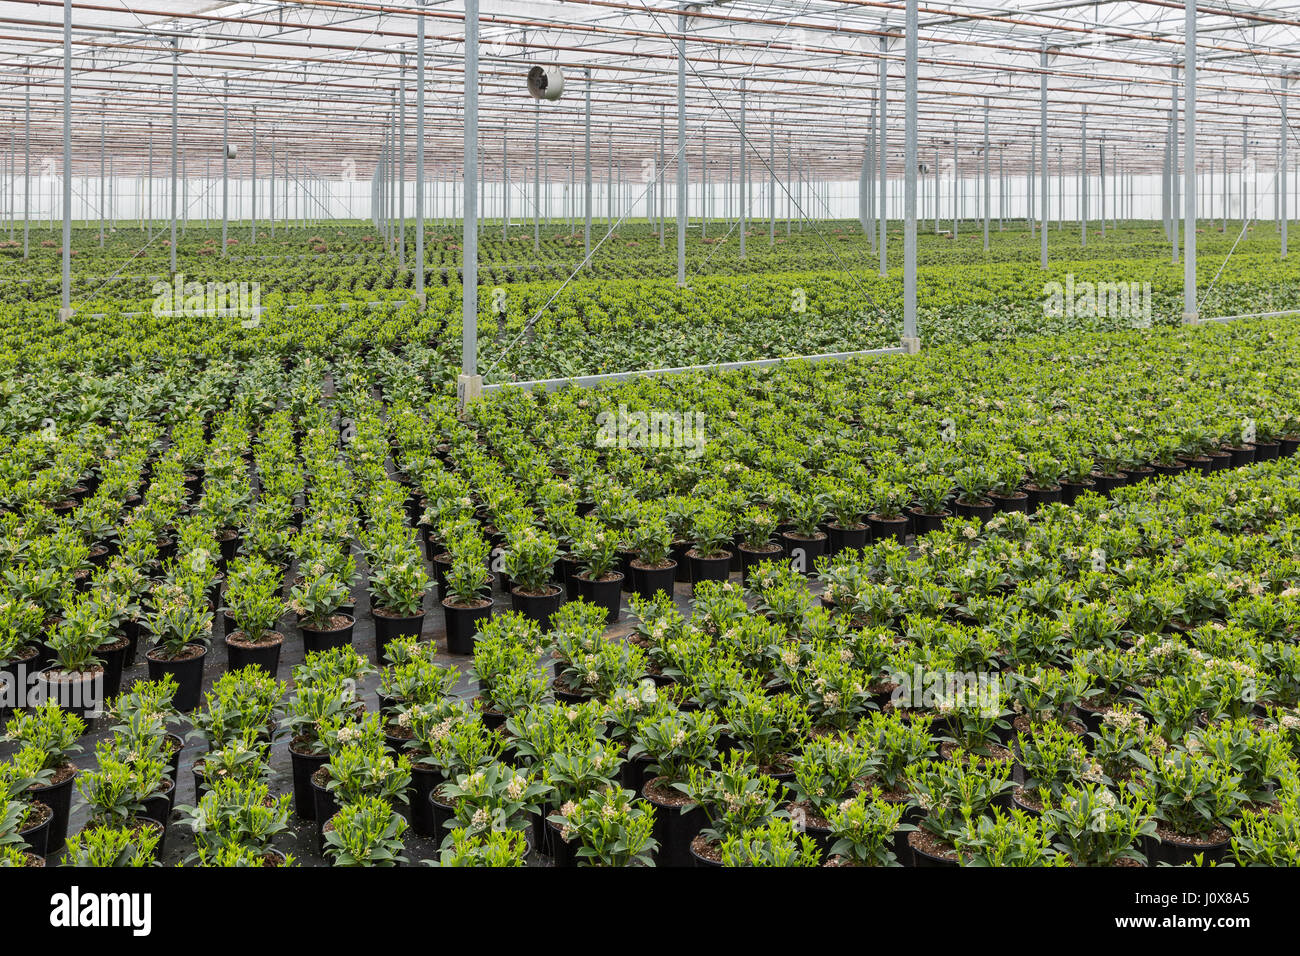 Dutch greenhouse with cultivation of Skimmia plants Stock Photo